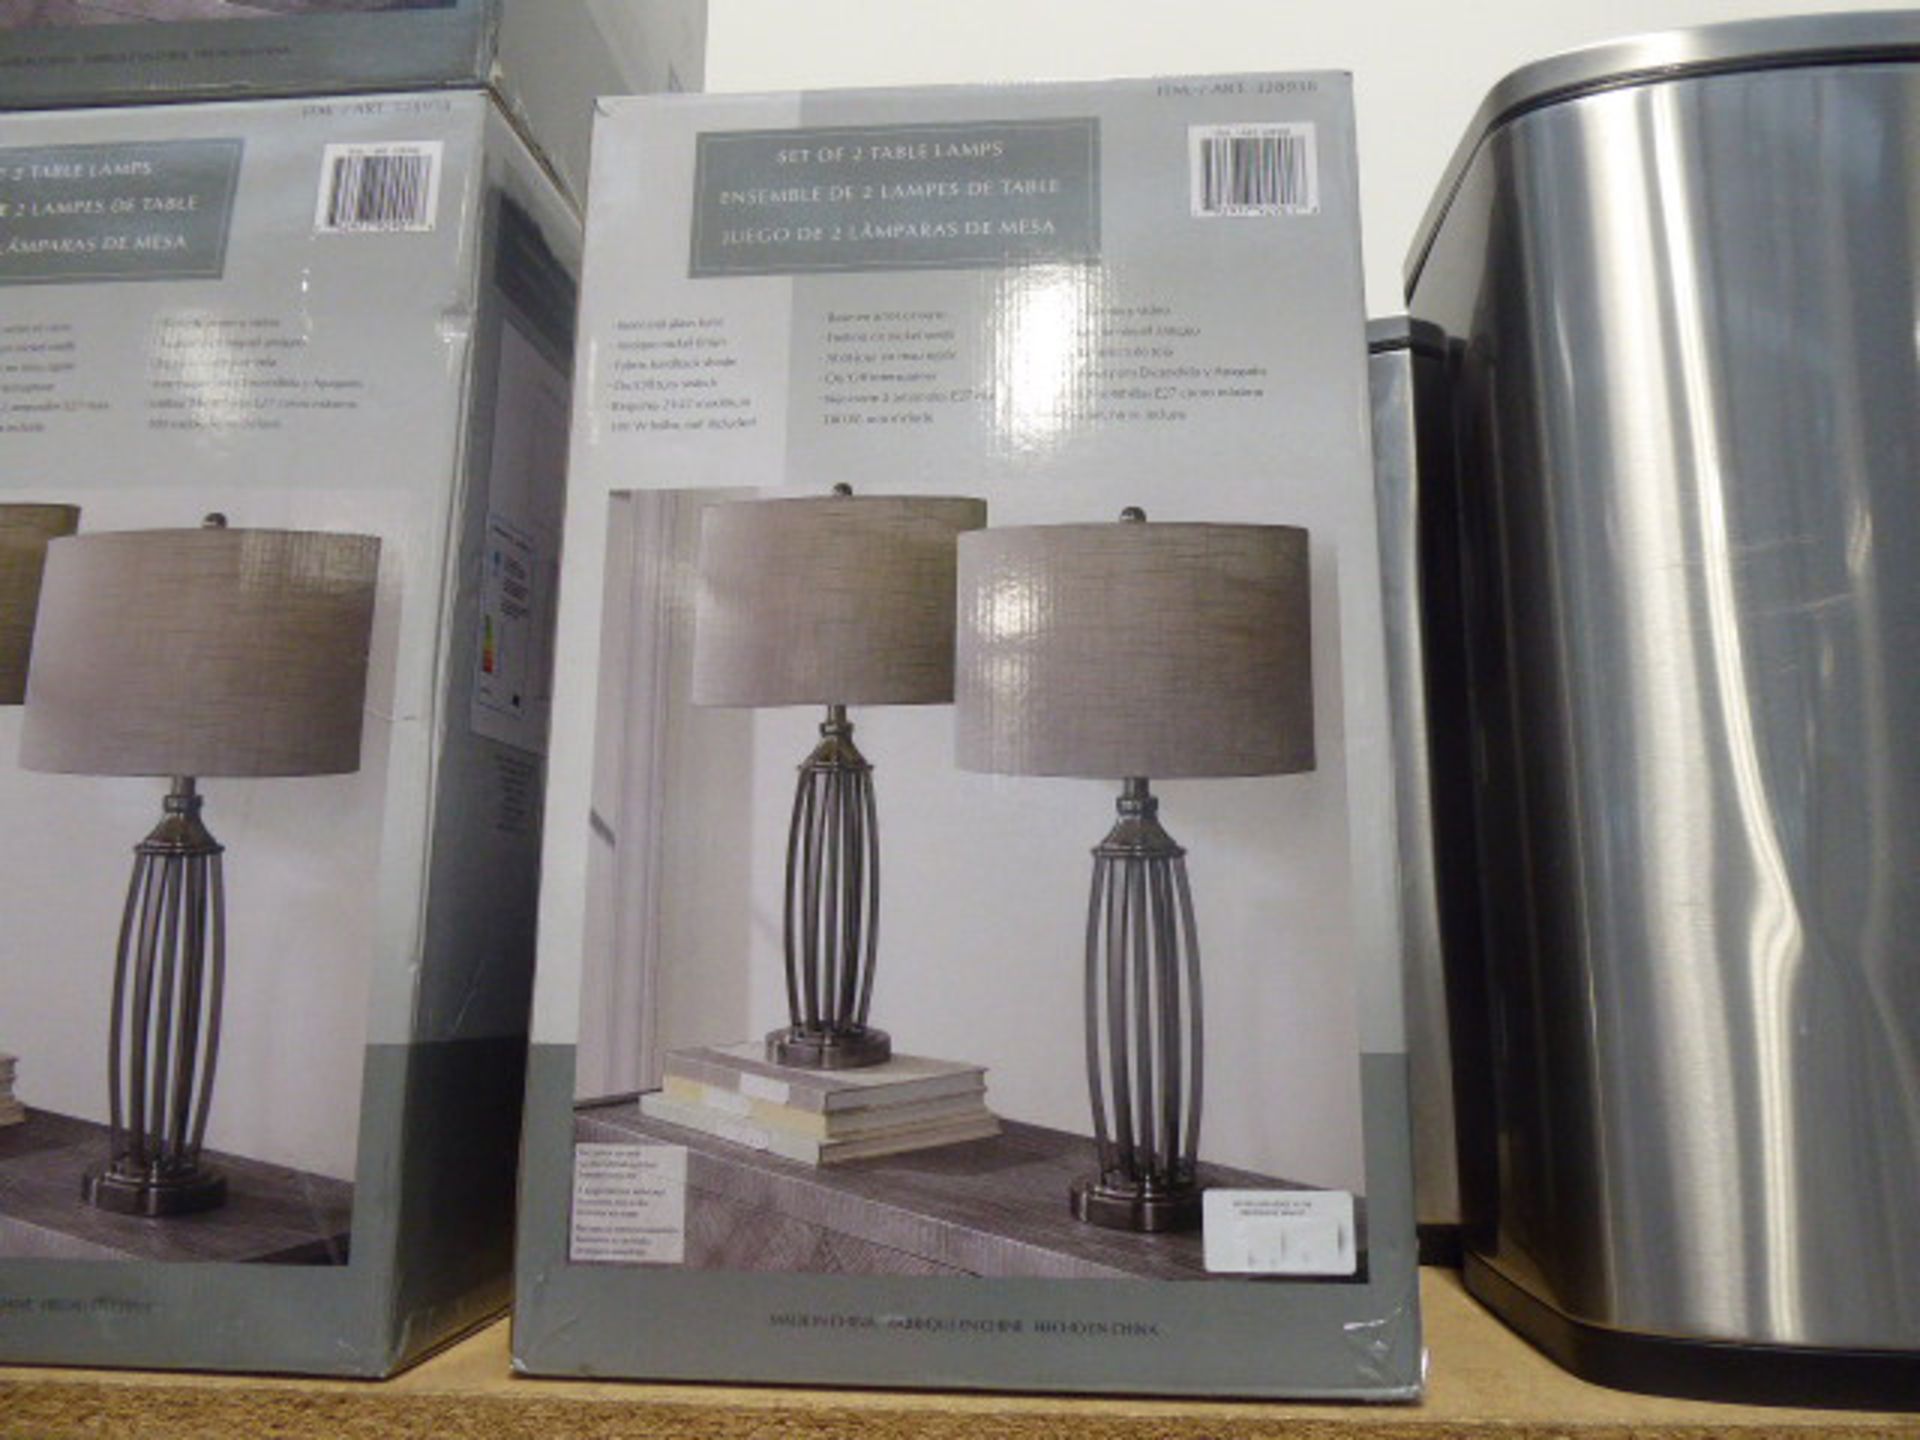 Boxed set of 2 table lamps